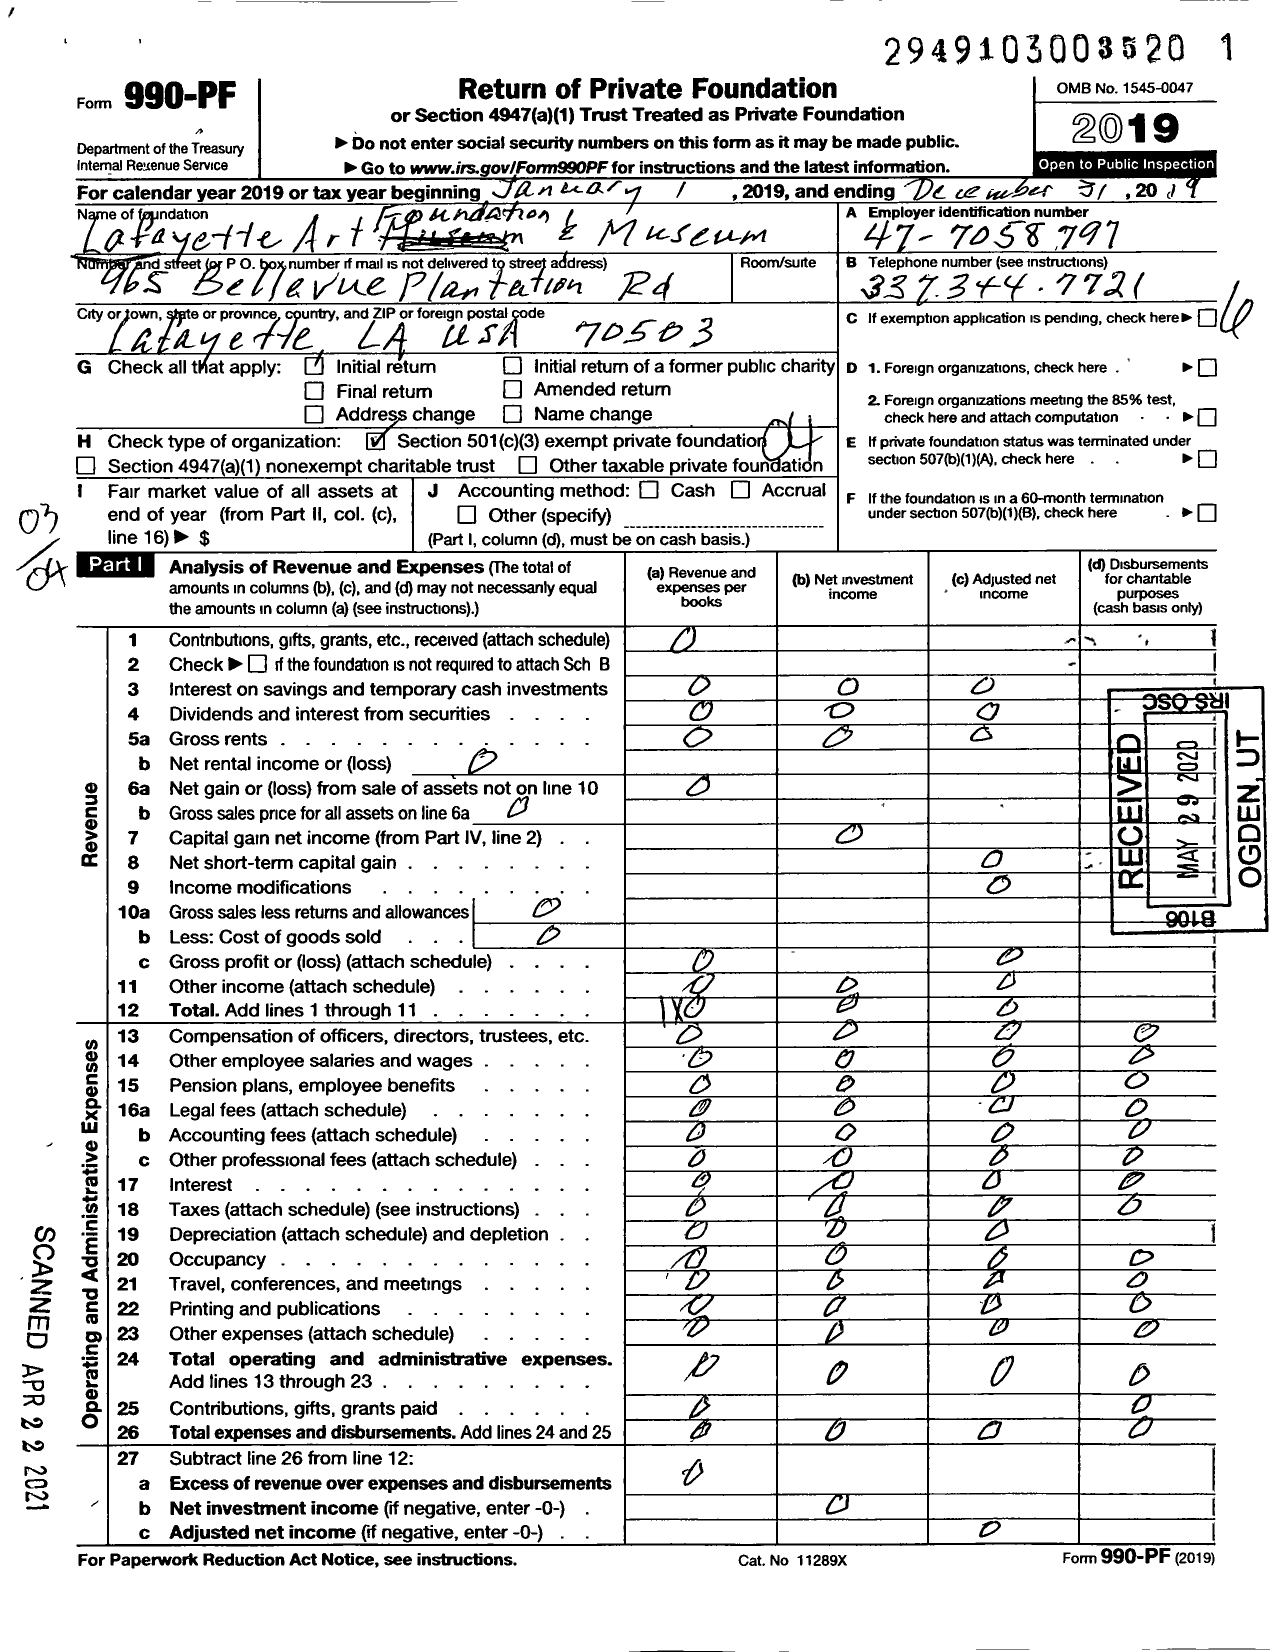 Image of first page of 2019 Form 990PF for Lafayette Art Foundation and Museum